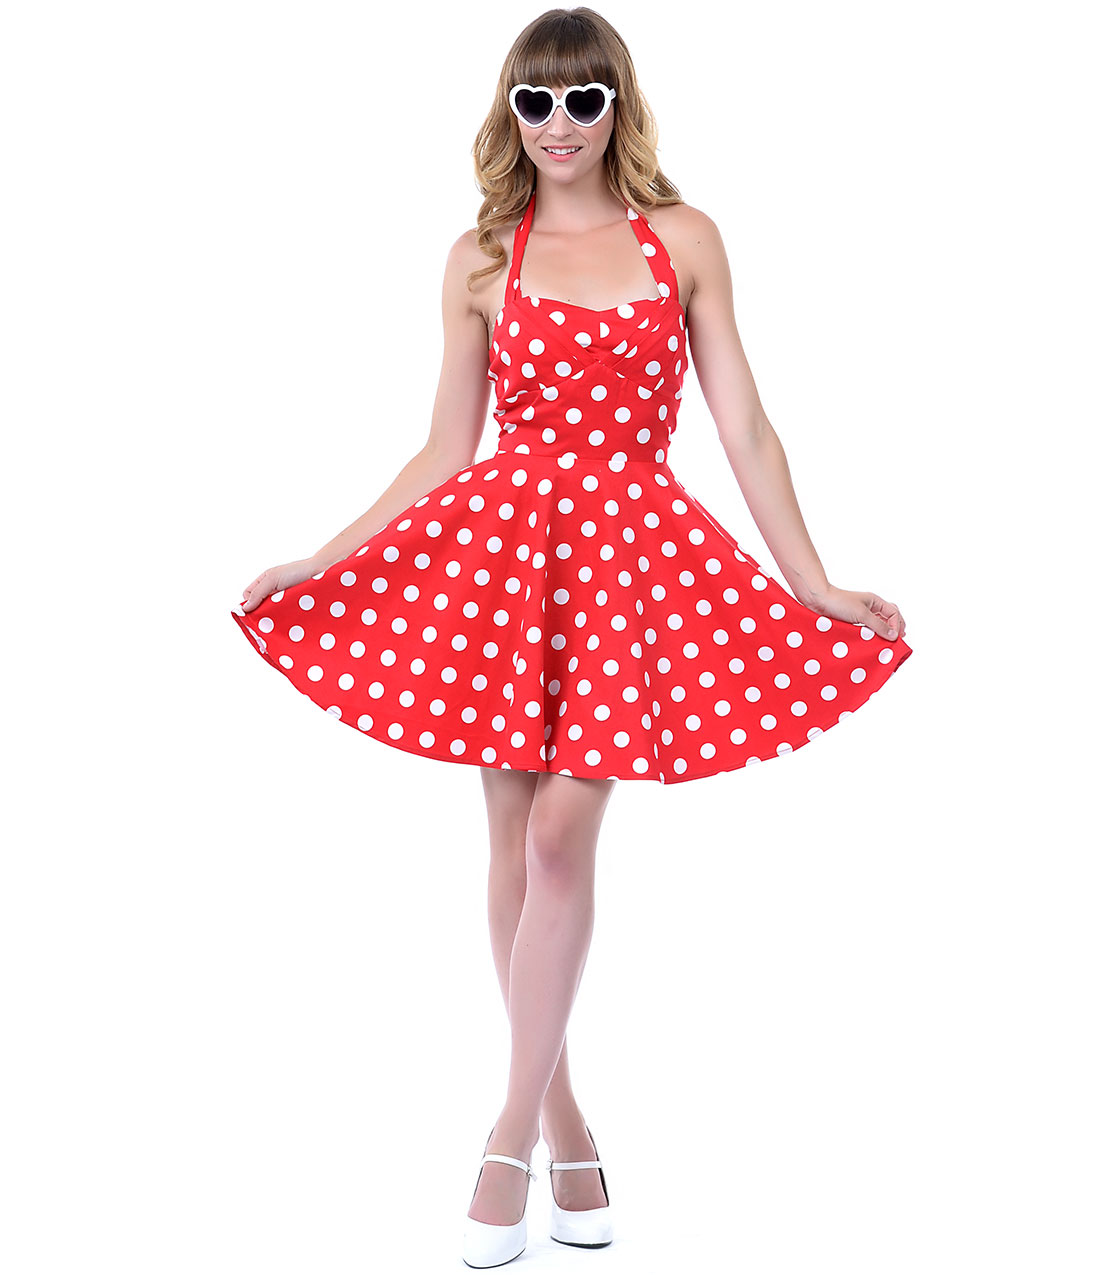 Red Polka Dot Dress Picture Collection Dressed Up Girl